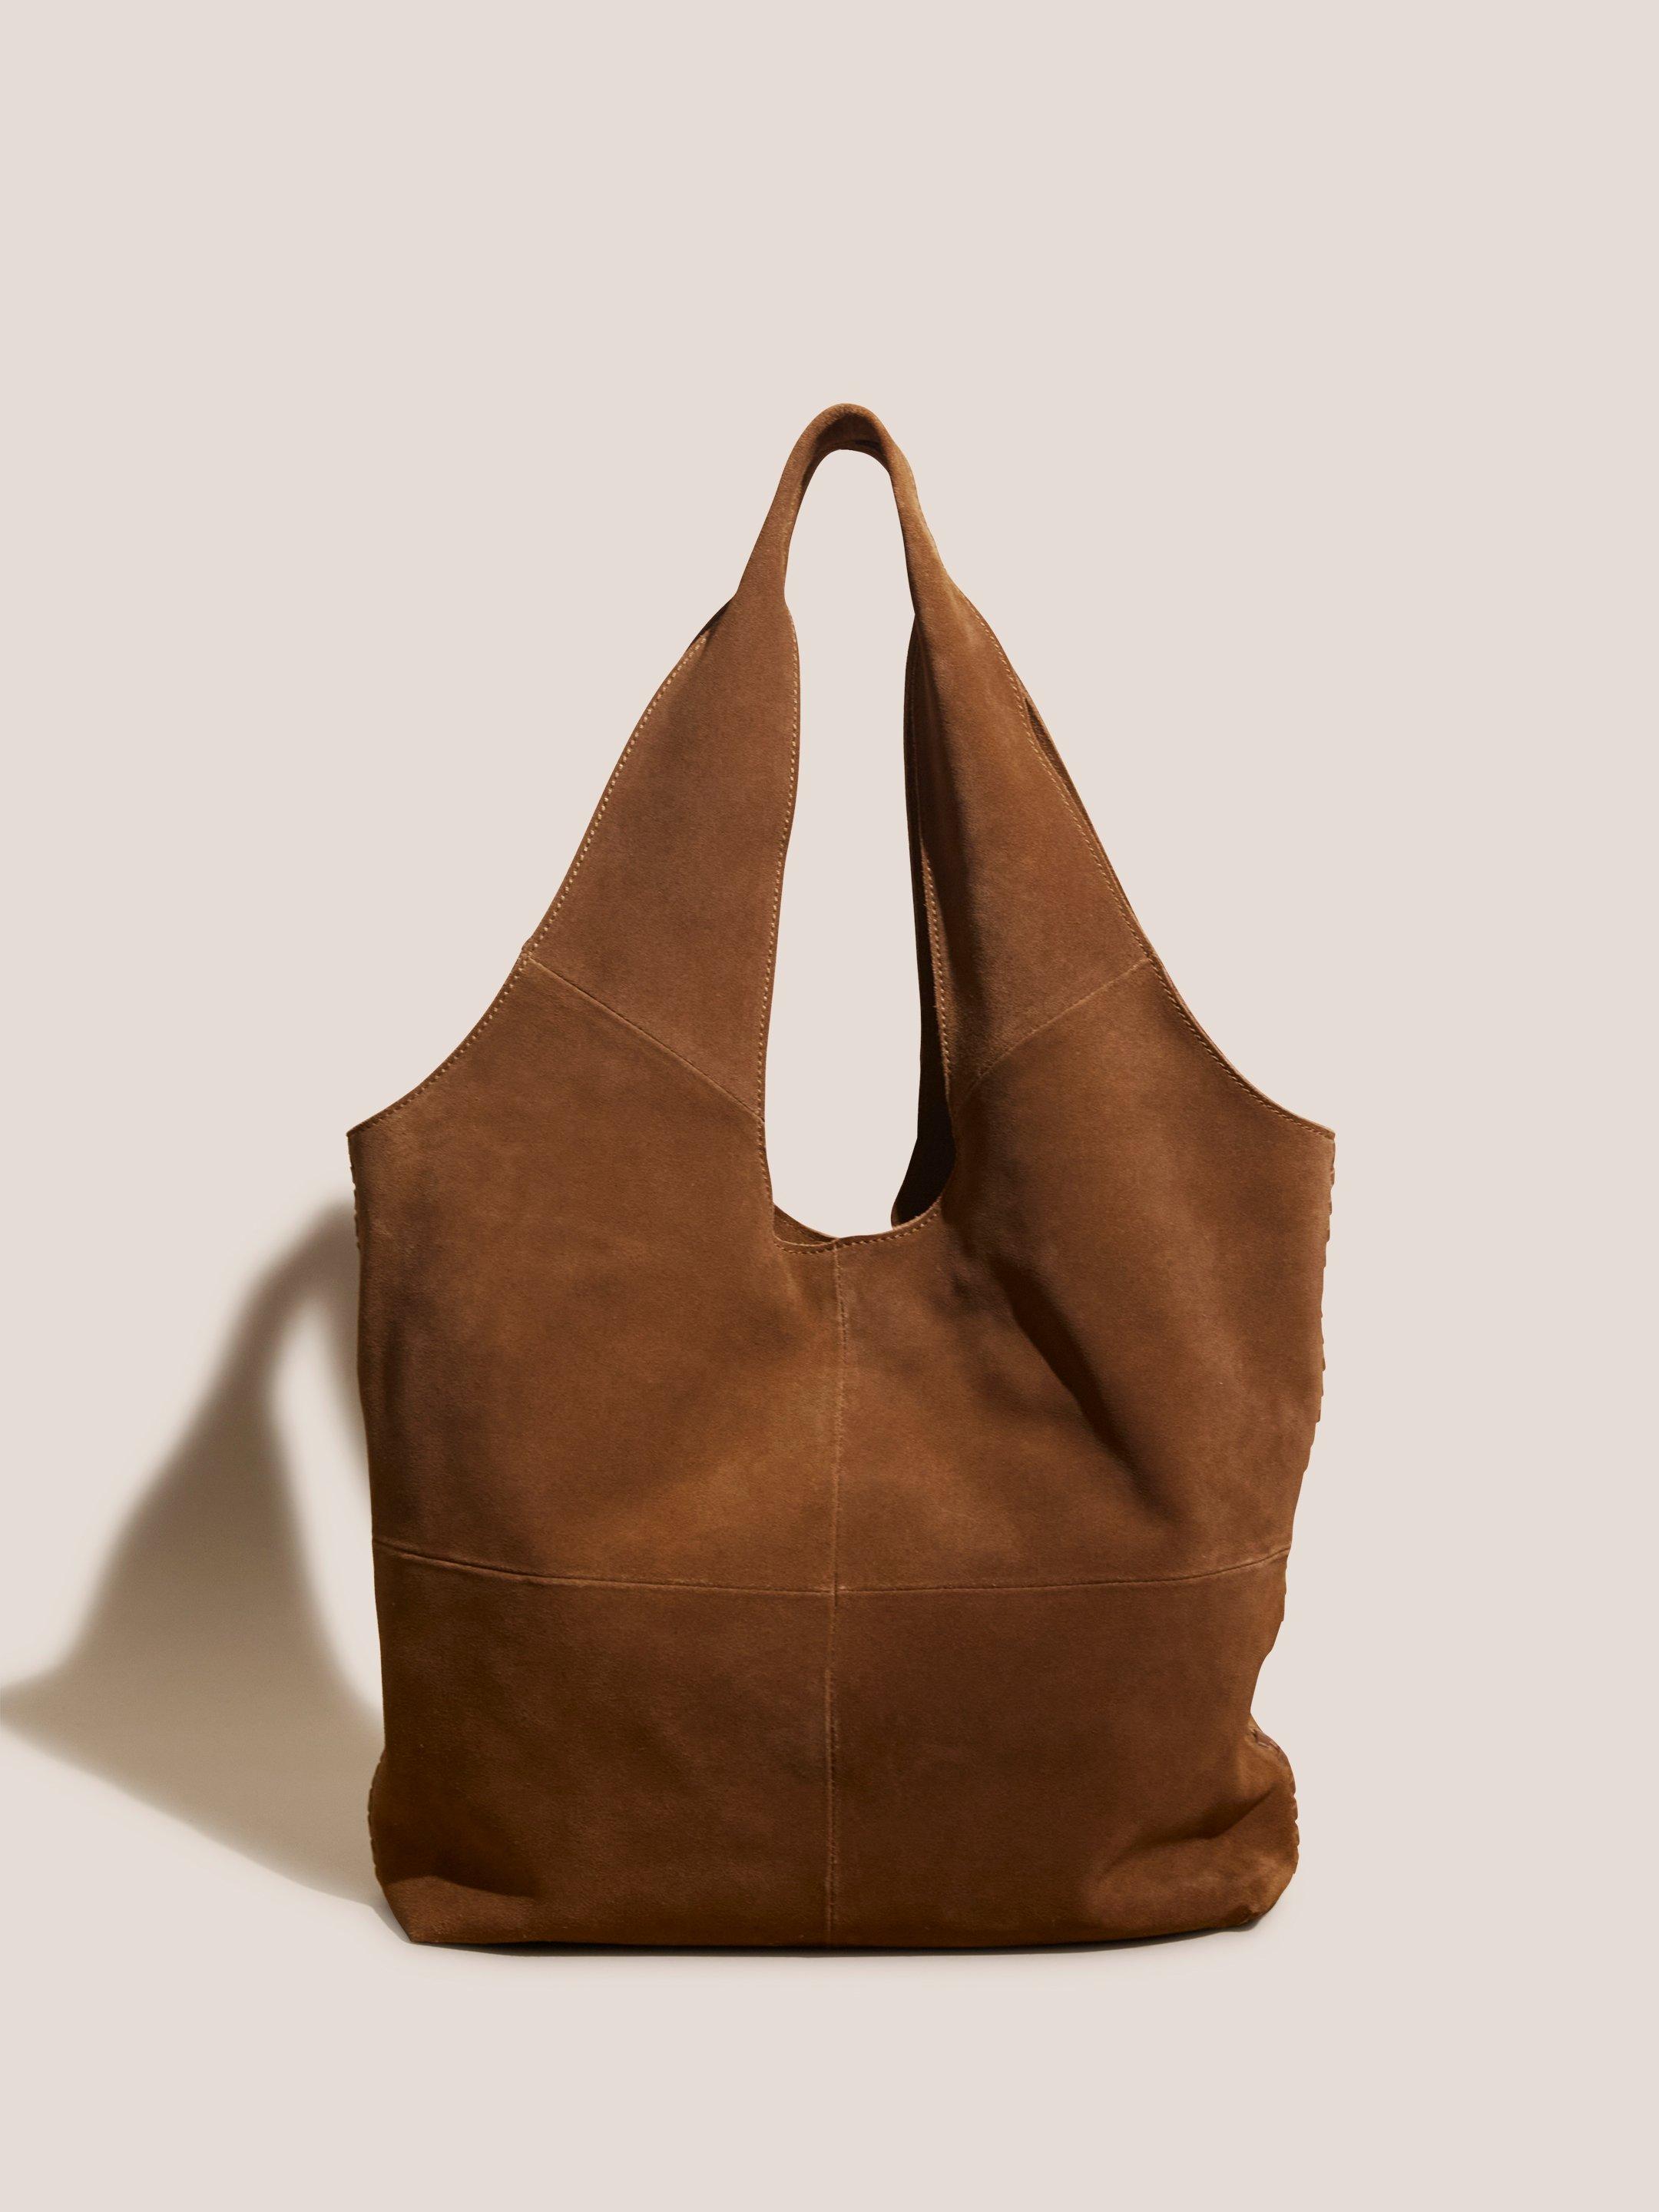 Embroidered Slouch Tote in TAN MULTI - FLAT BACK